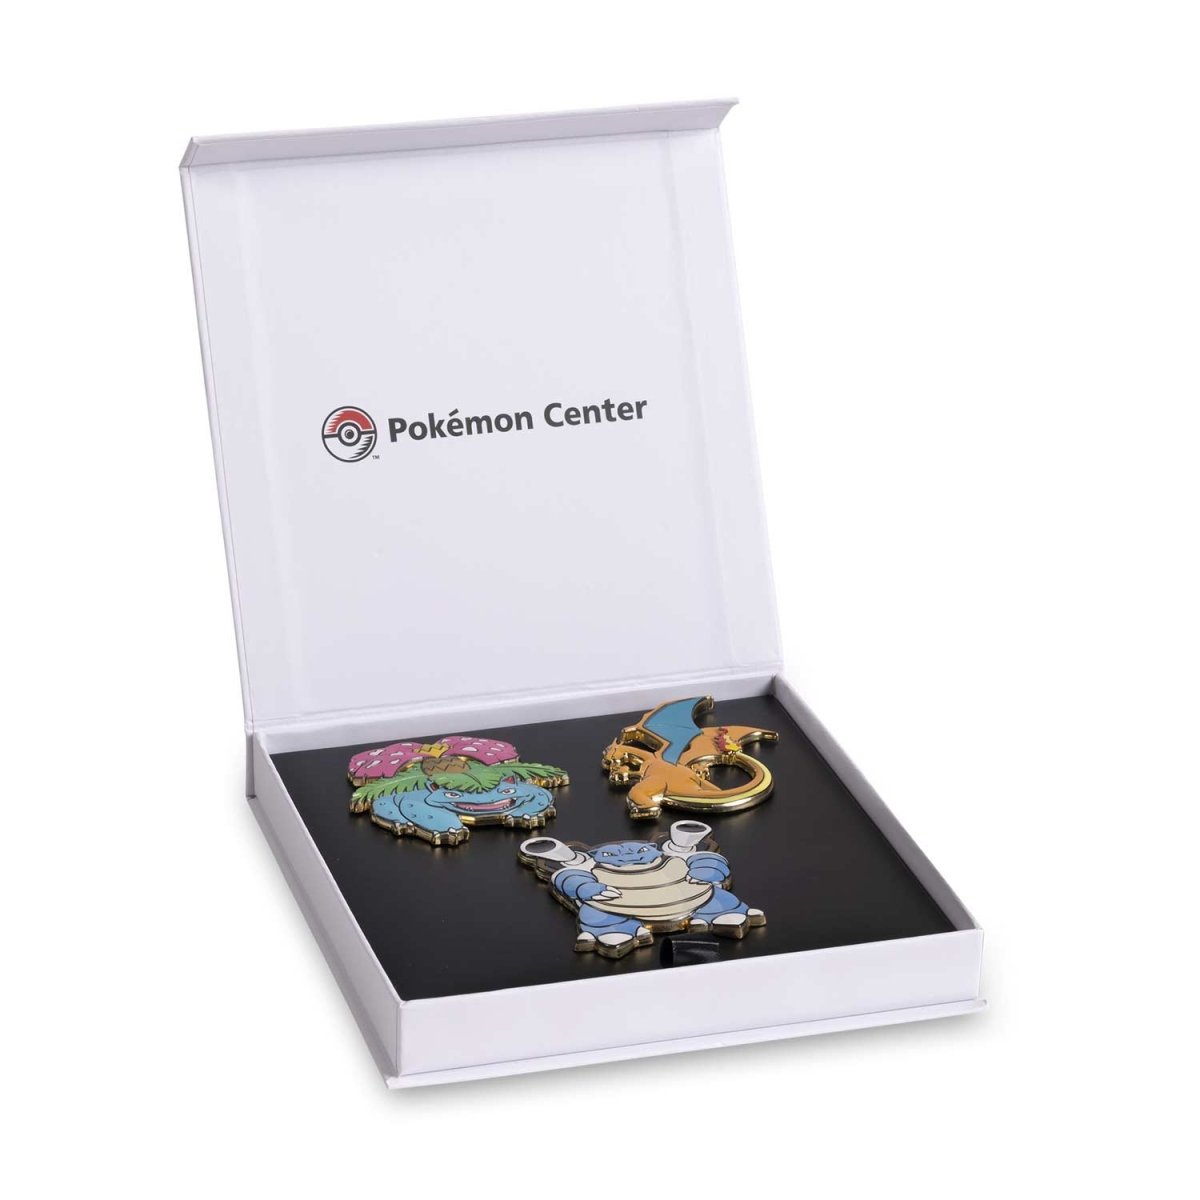 Stunning pokemon pins for Decor and Souvenirs 